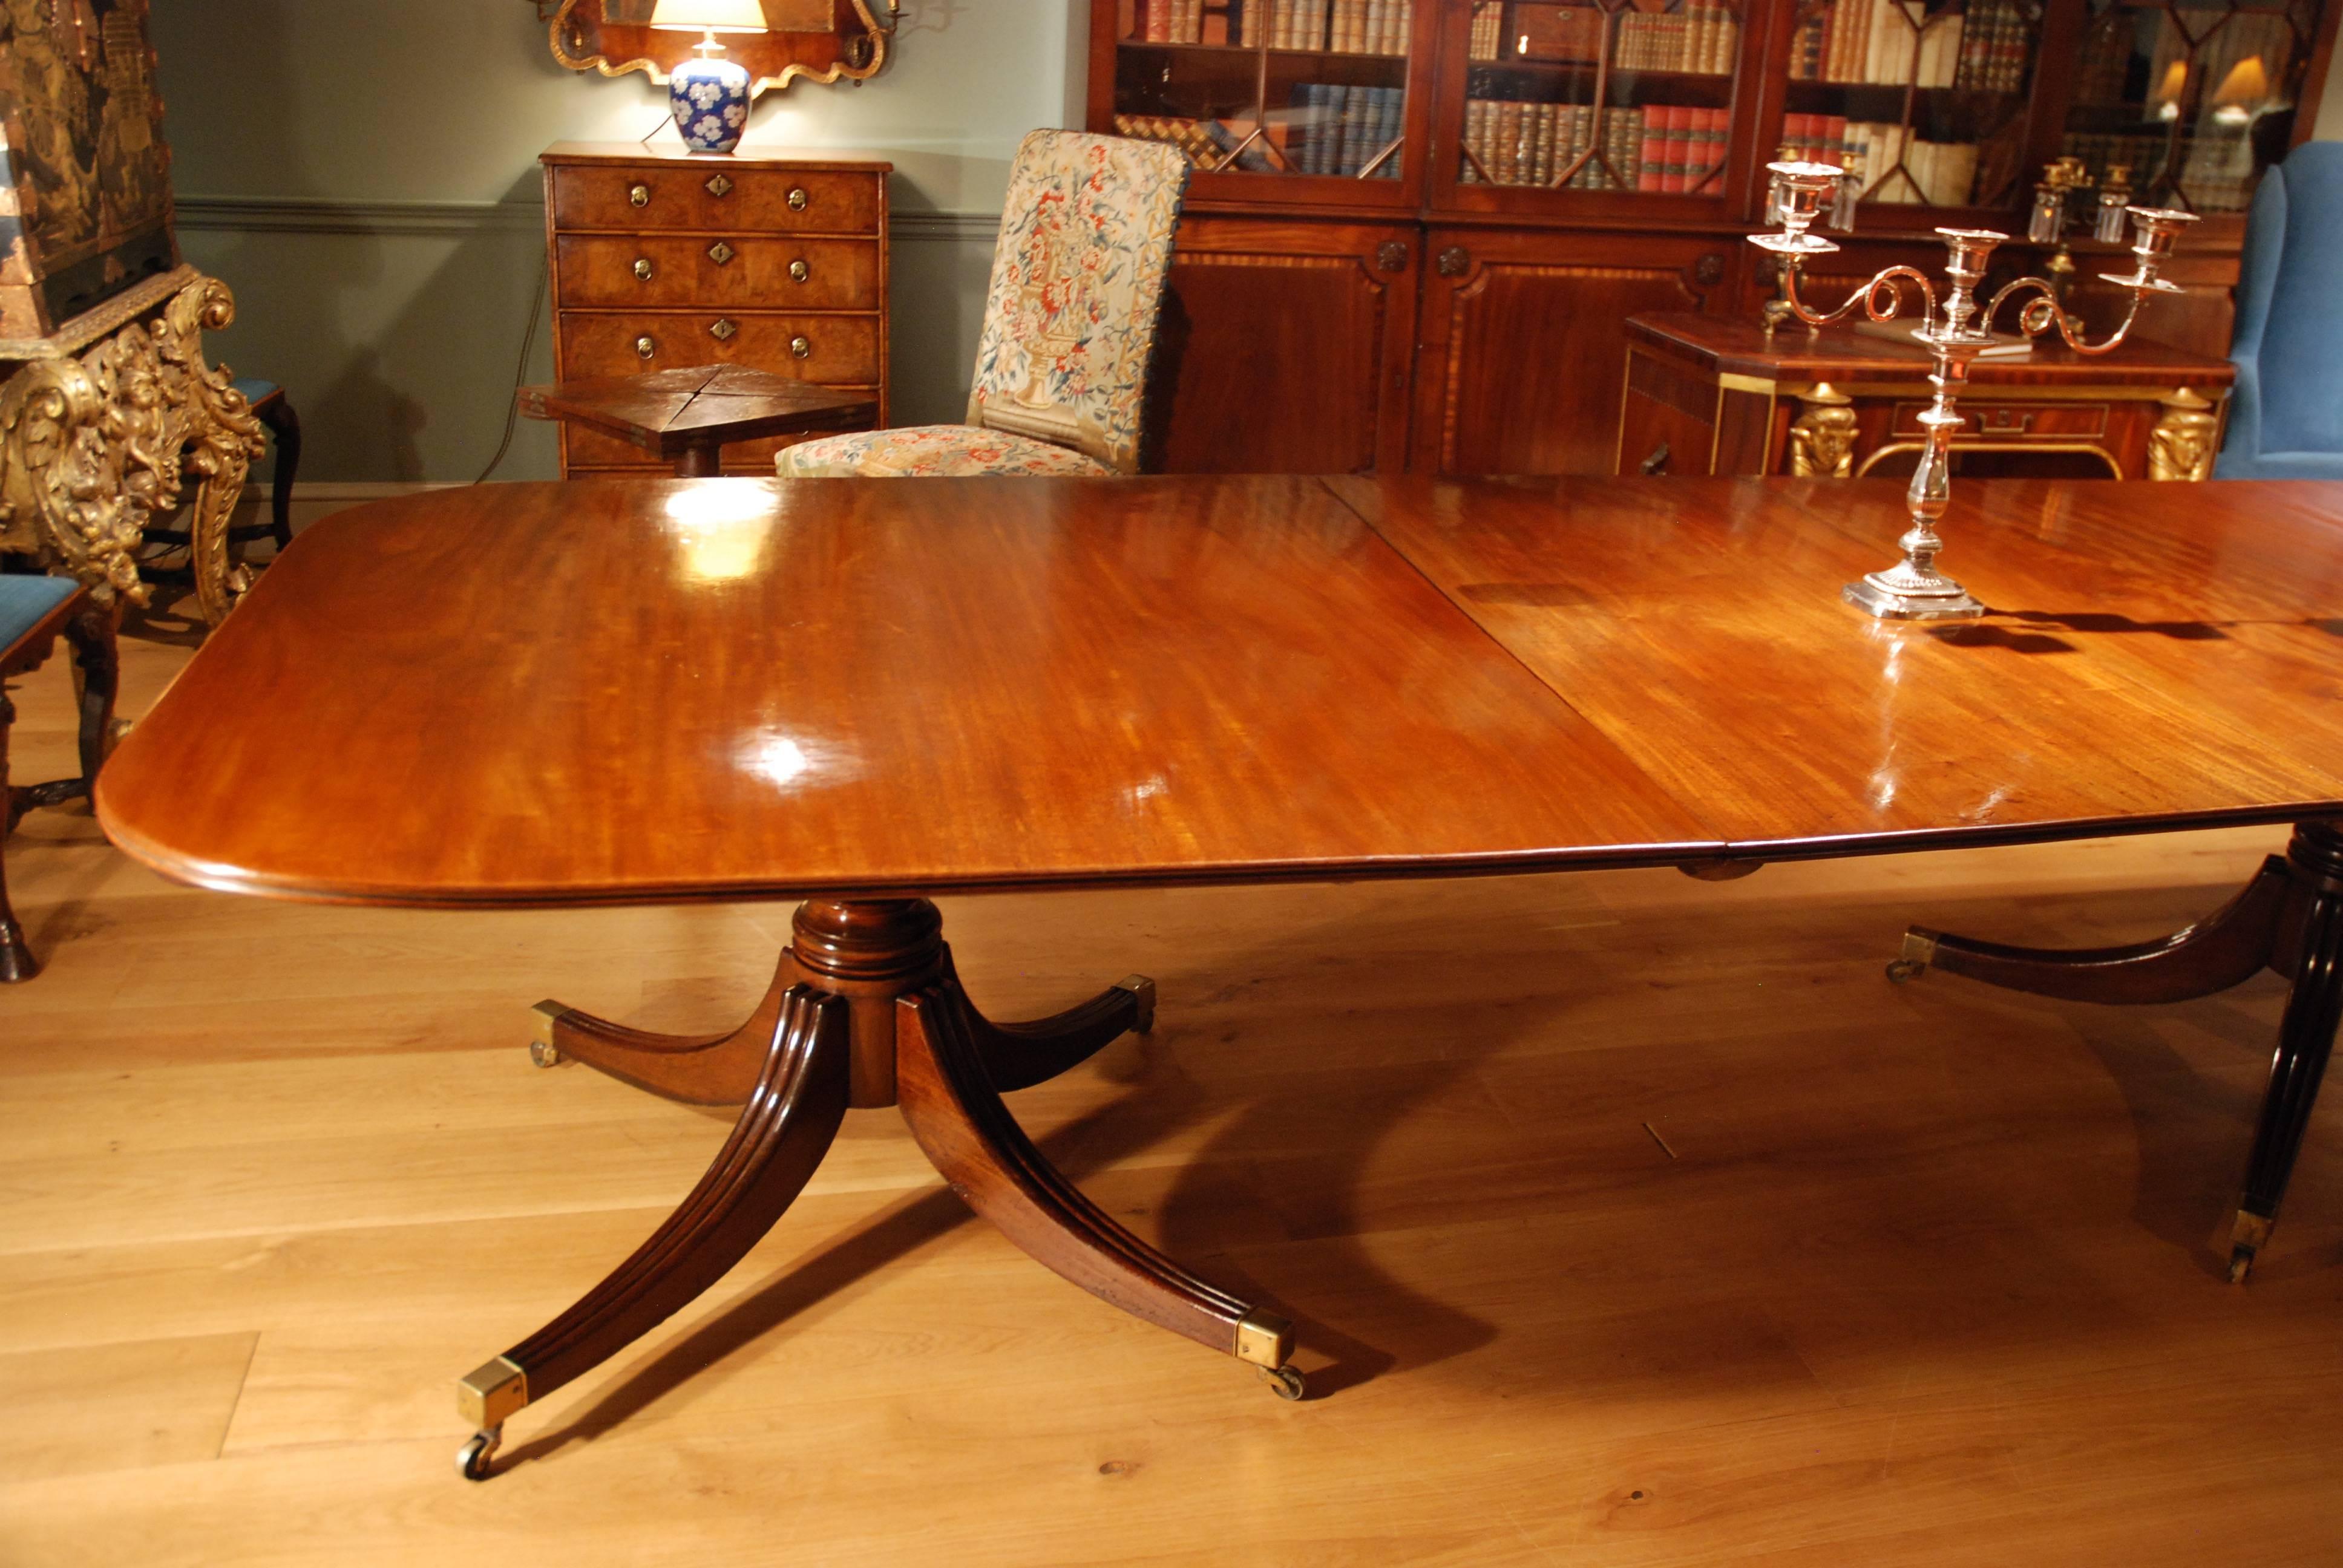 A large George III mahogany dining table of excellent warm colour, standing on three turned pillars each supported by four splay legs terminating in brass cap castors. This table consists of three sections all of which can be tipped to a vertical